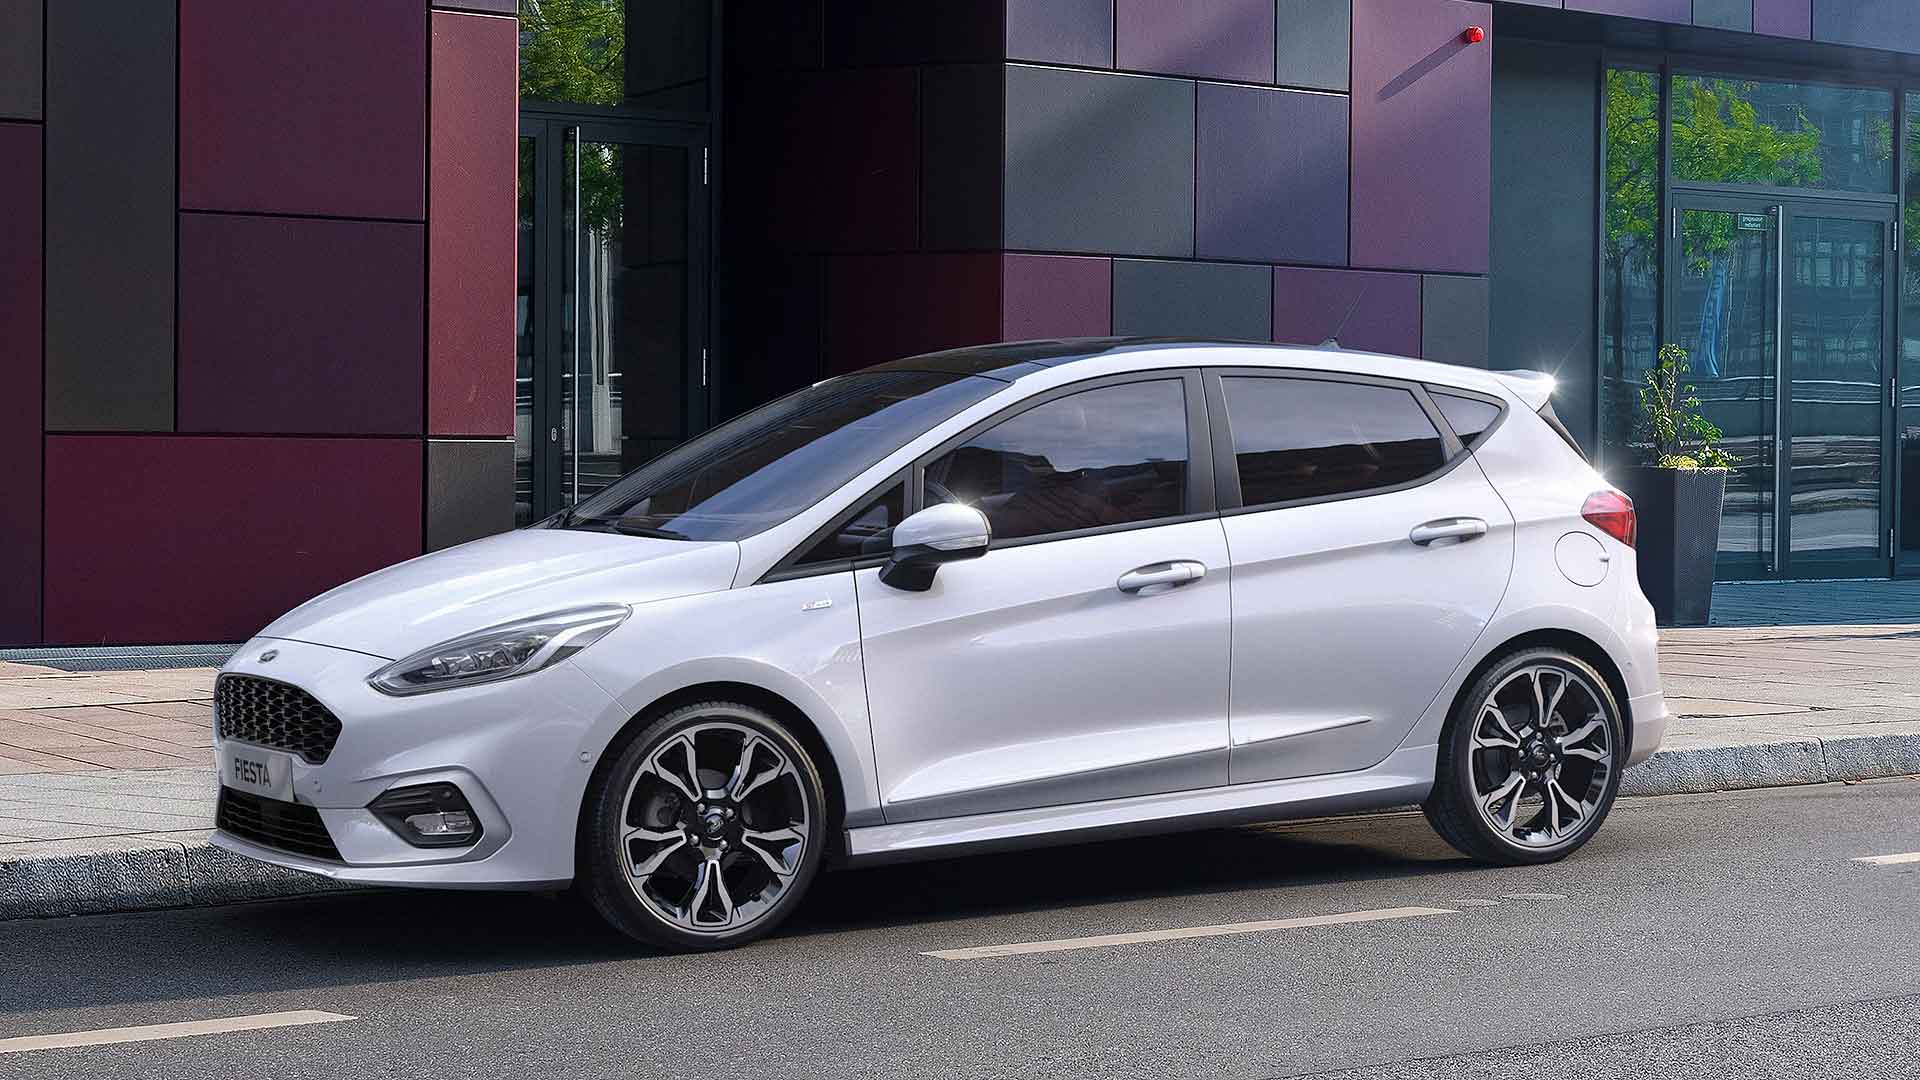 kruis Correlaat shit New Ford Fiesta mild hybrid version launched - Motoring Research